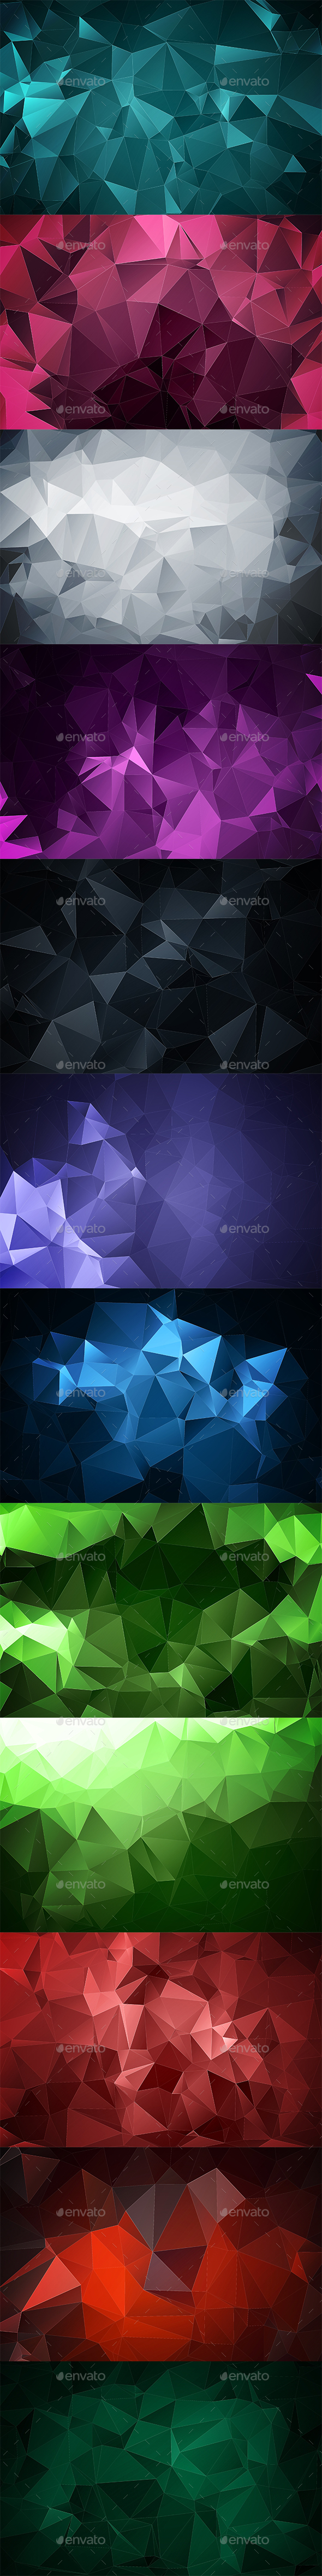 Abstract Polygonal Backgrounds Vol2